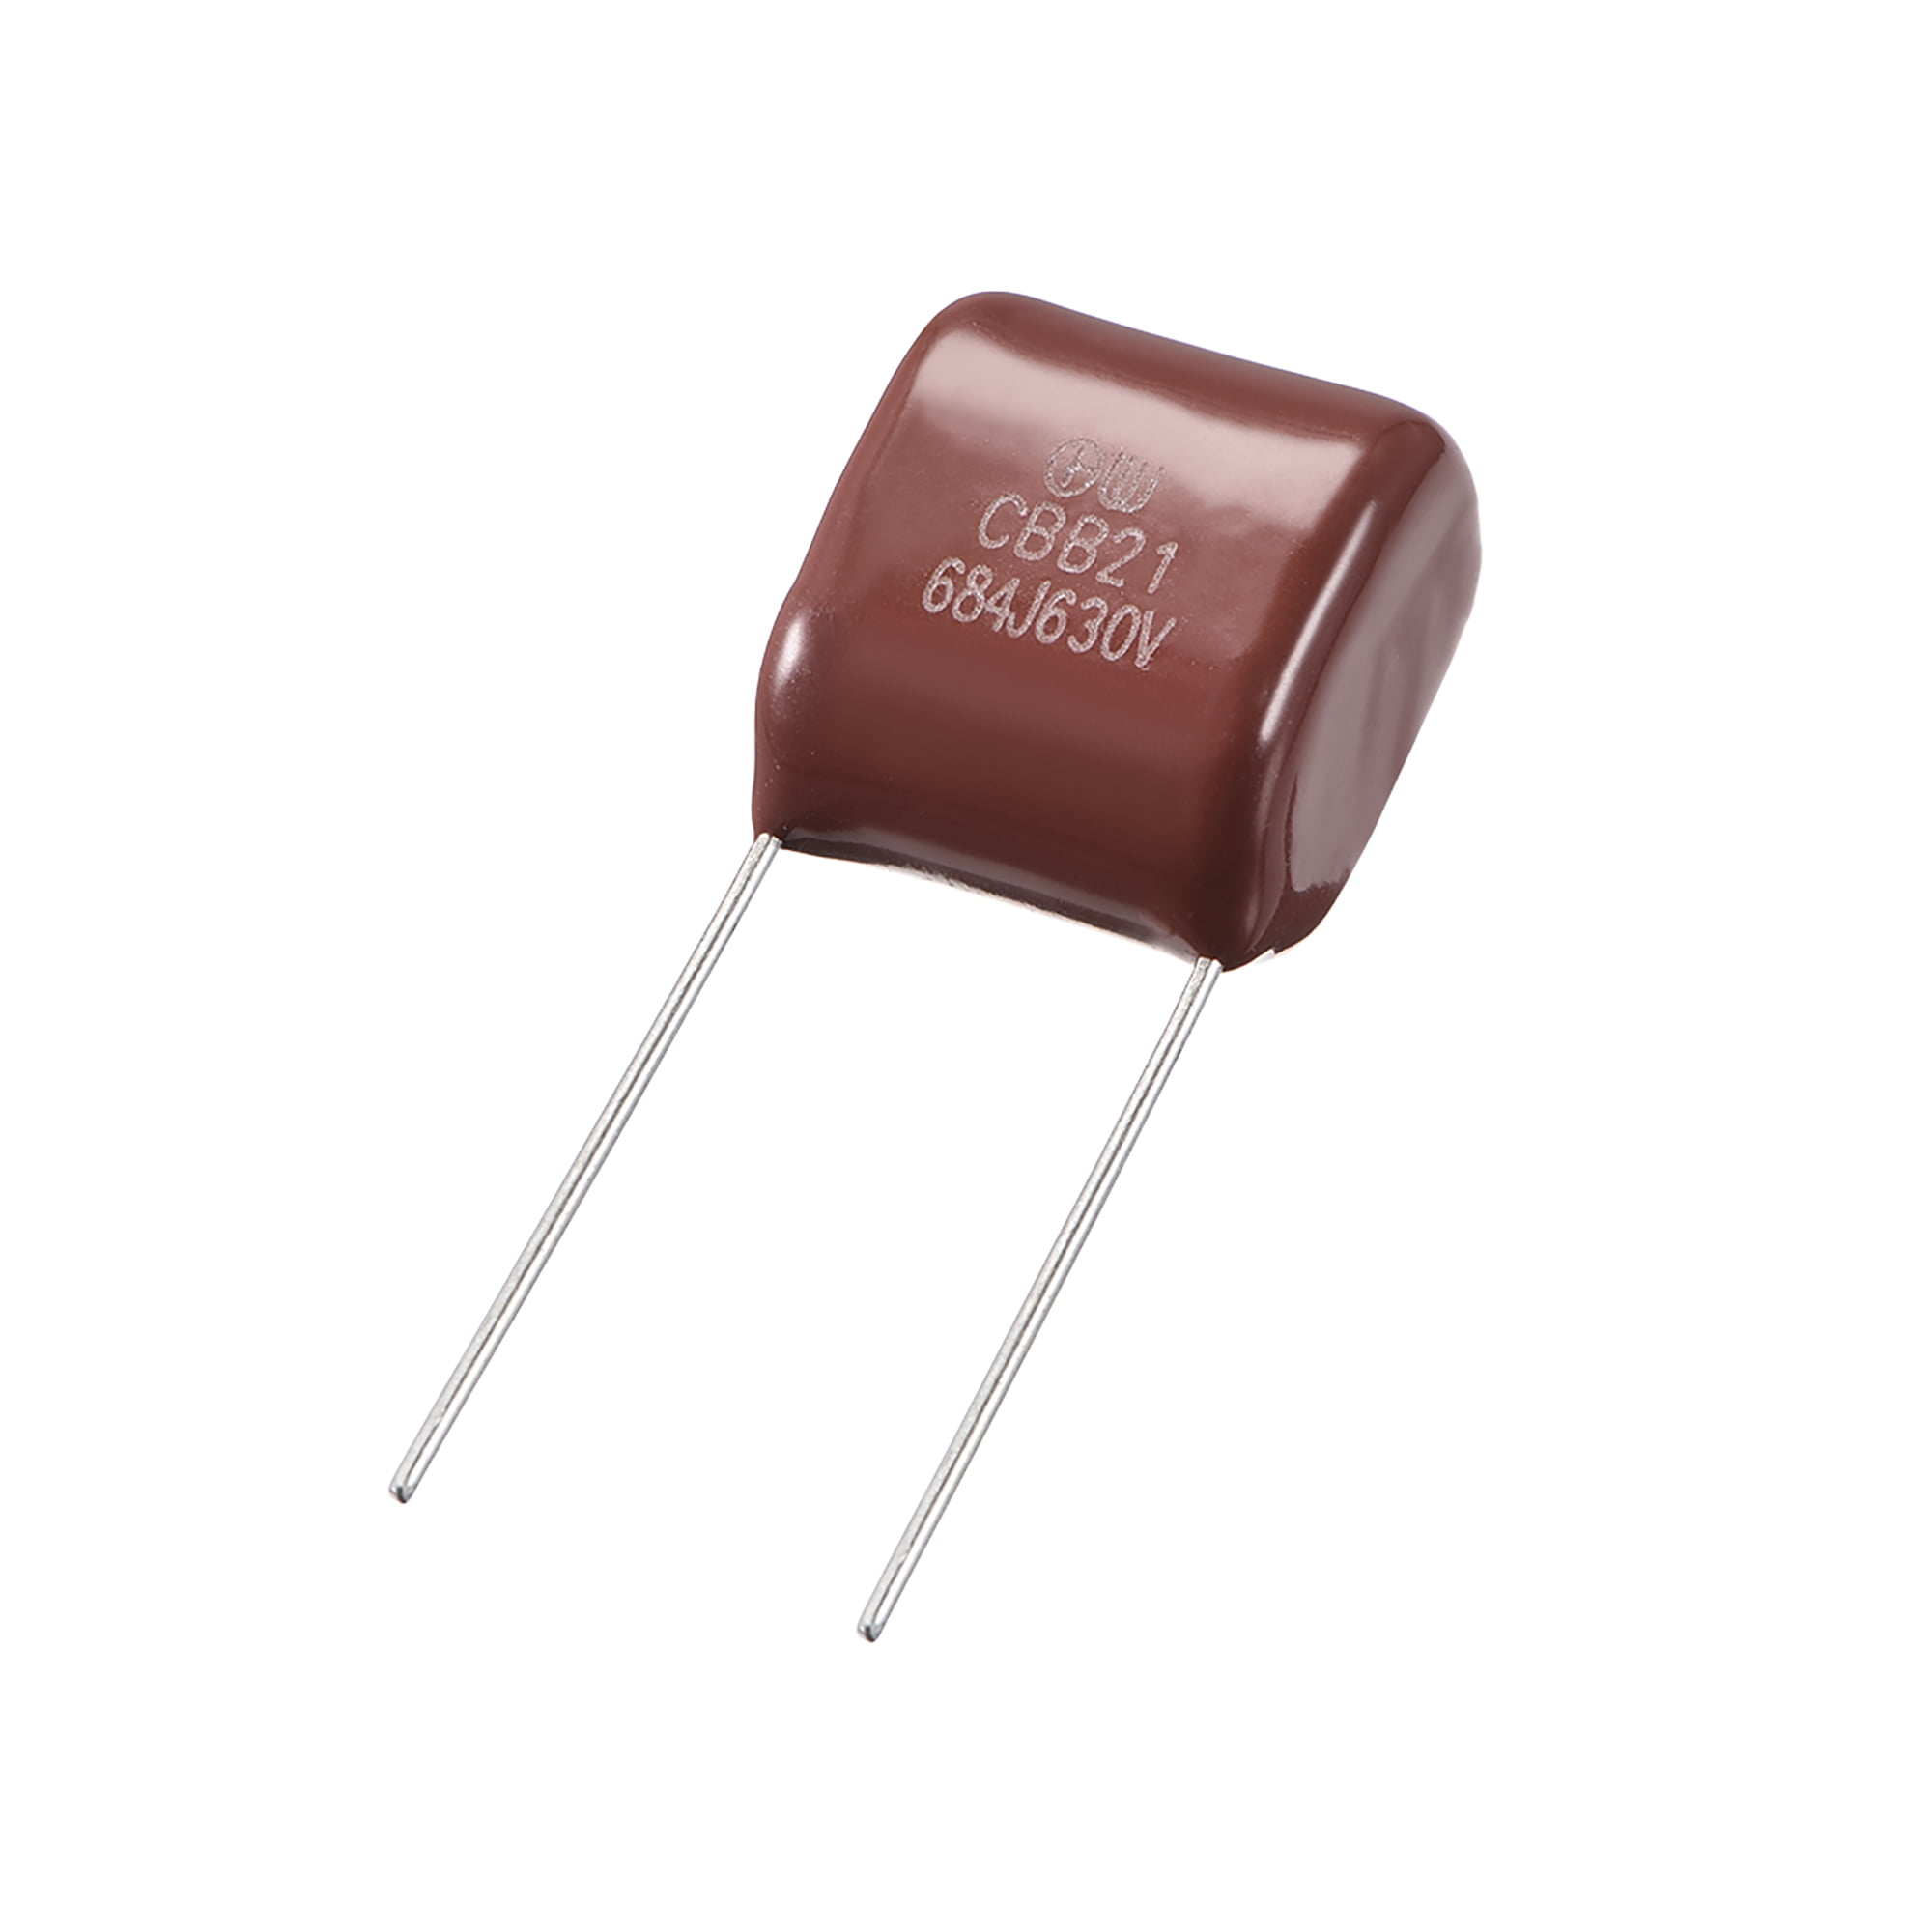 uxcell CBB21 Metallized Polypropylene Film Capacitors 250V 0.1uF for Electric Circuits Energy Saving Lamps Pack of 30 